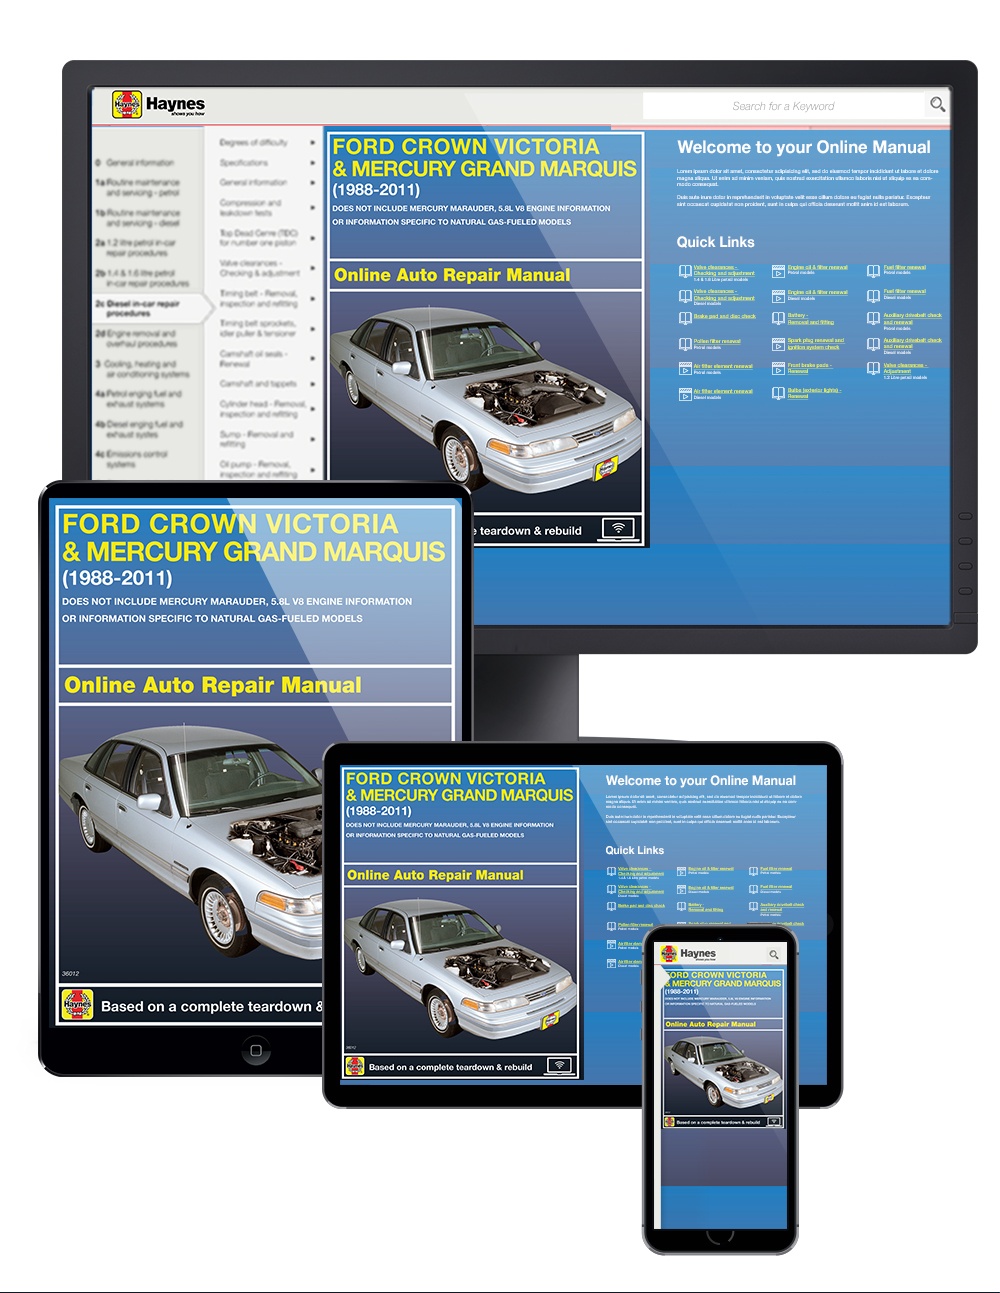 2003 grand marquis service manual download pdf framed perspective vol 1 pdf free download